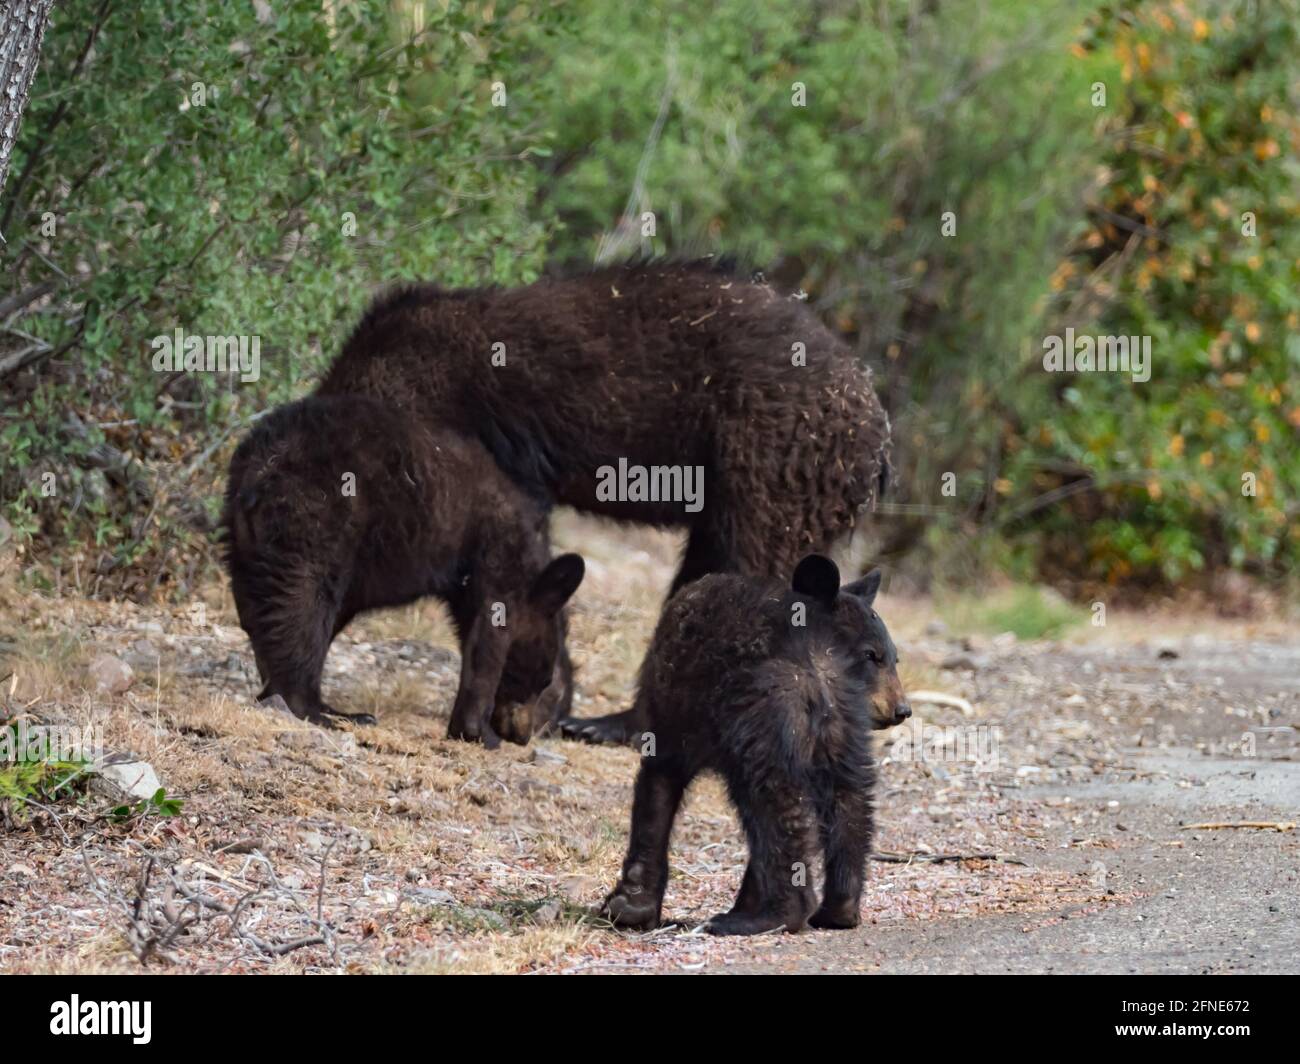 American Black Bear, Ursus americanus, with 2 cubs in the hotel area of Chisos Basin, Big Bend National Park, Texas, USA Stock Photo